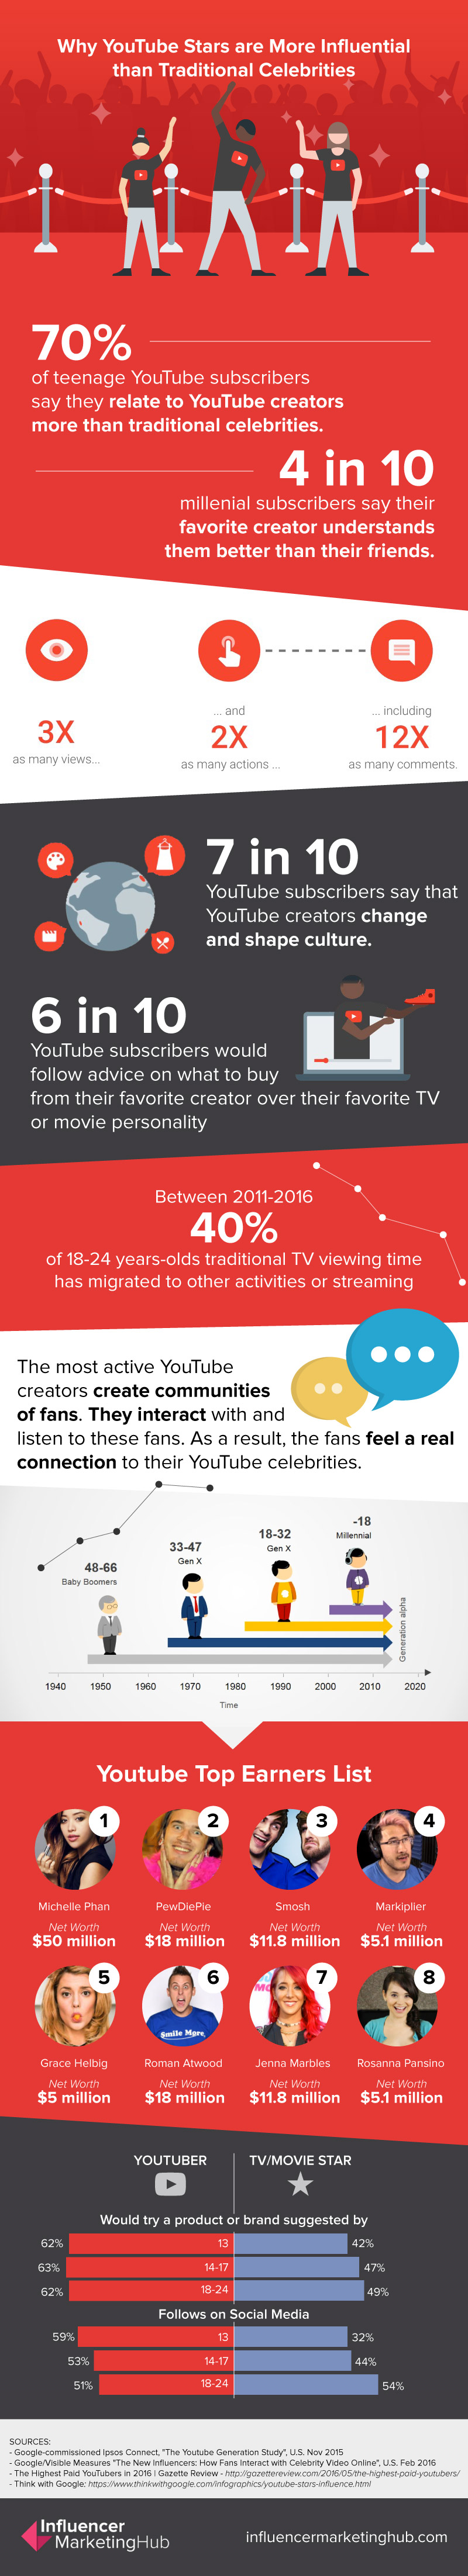 Why YouTube Stars Are More Influential Than Traditional Celebrities